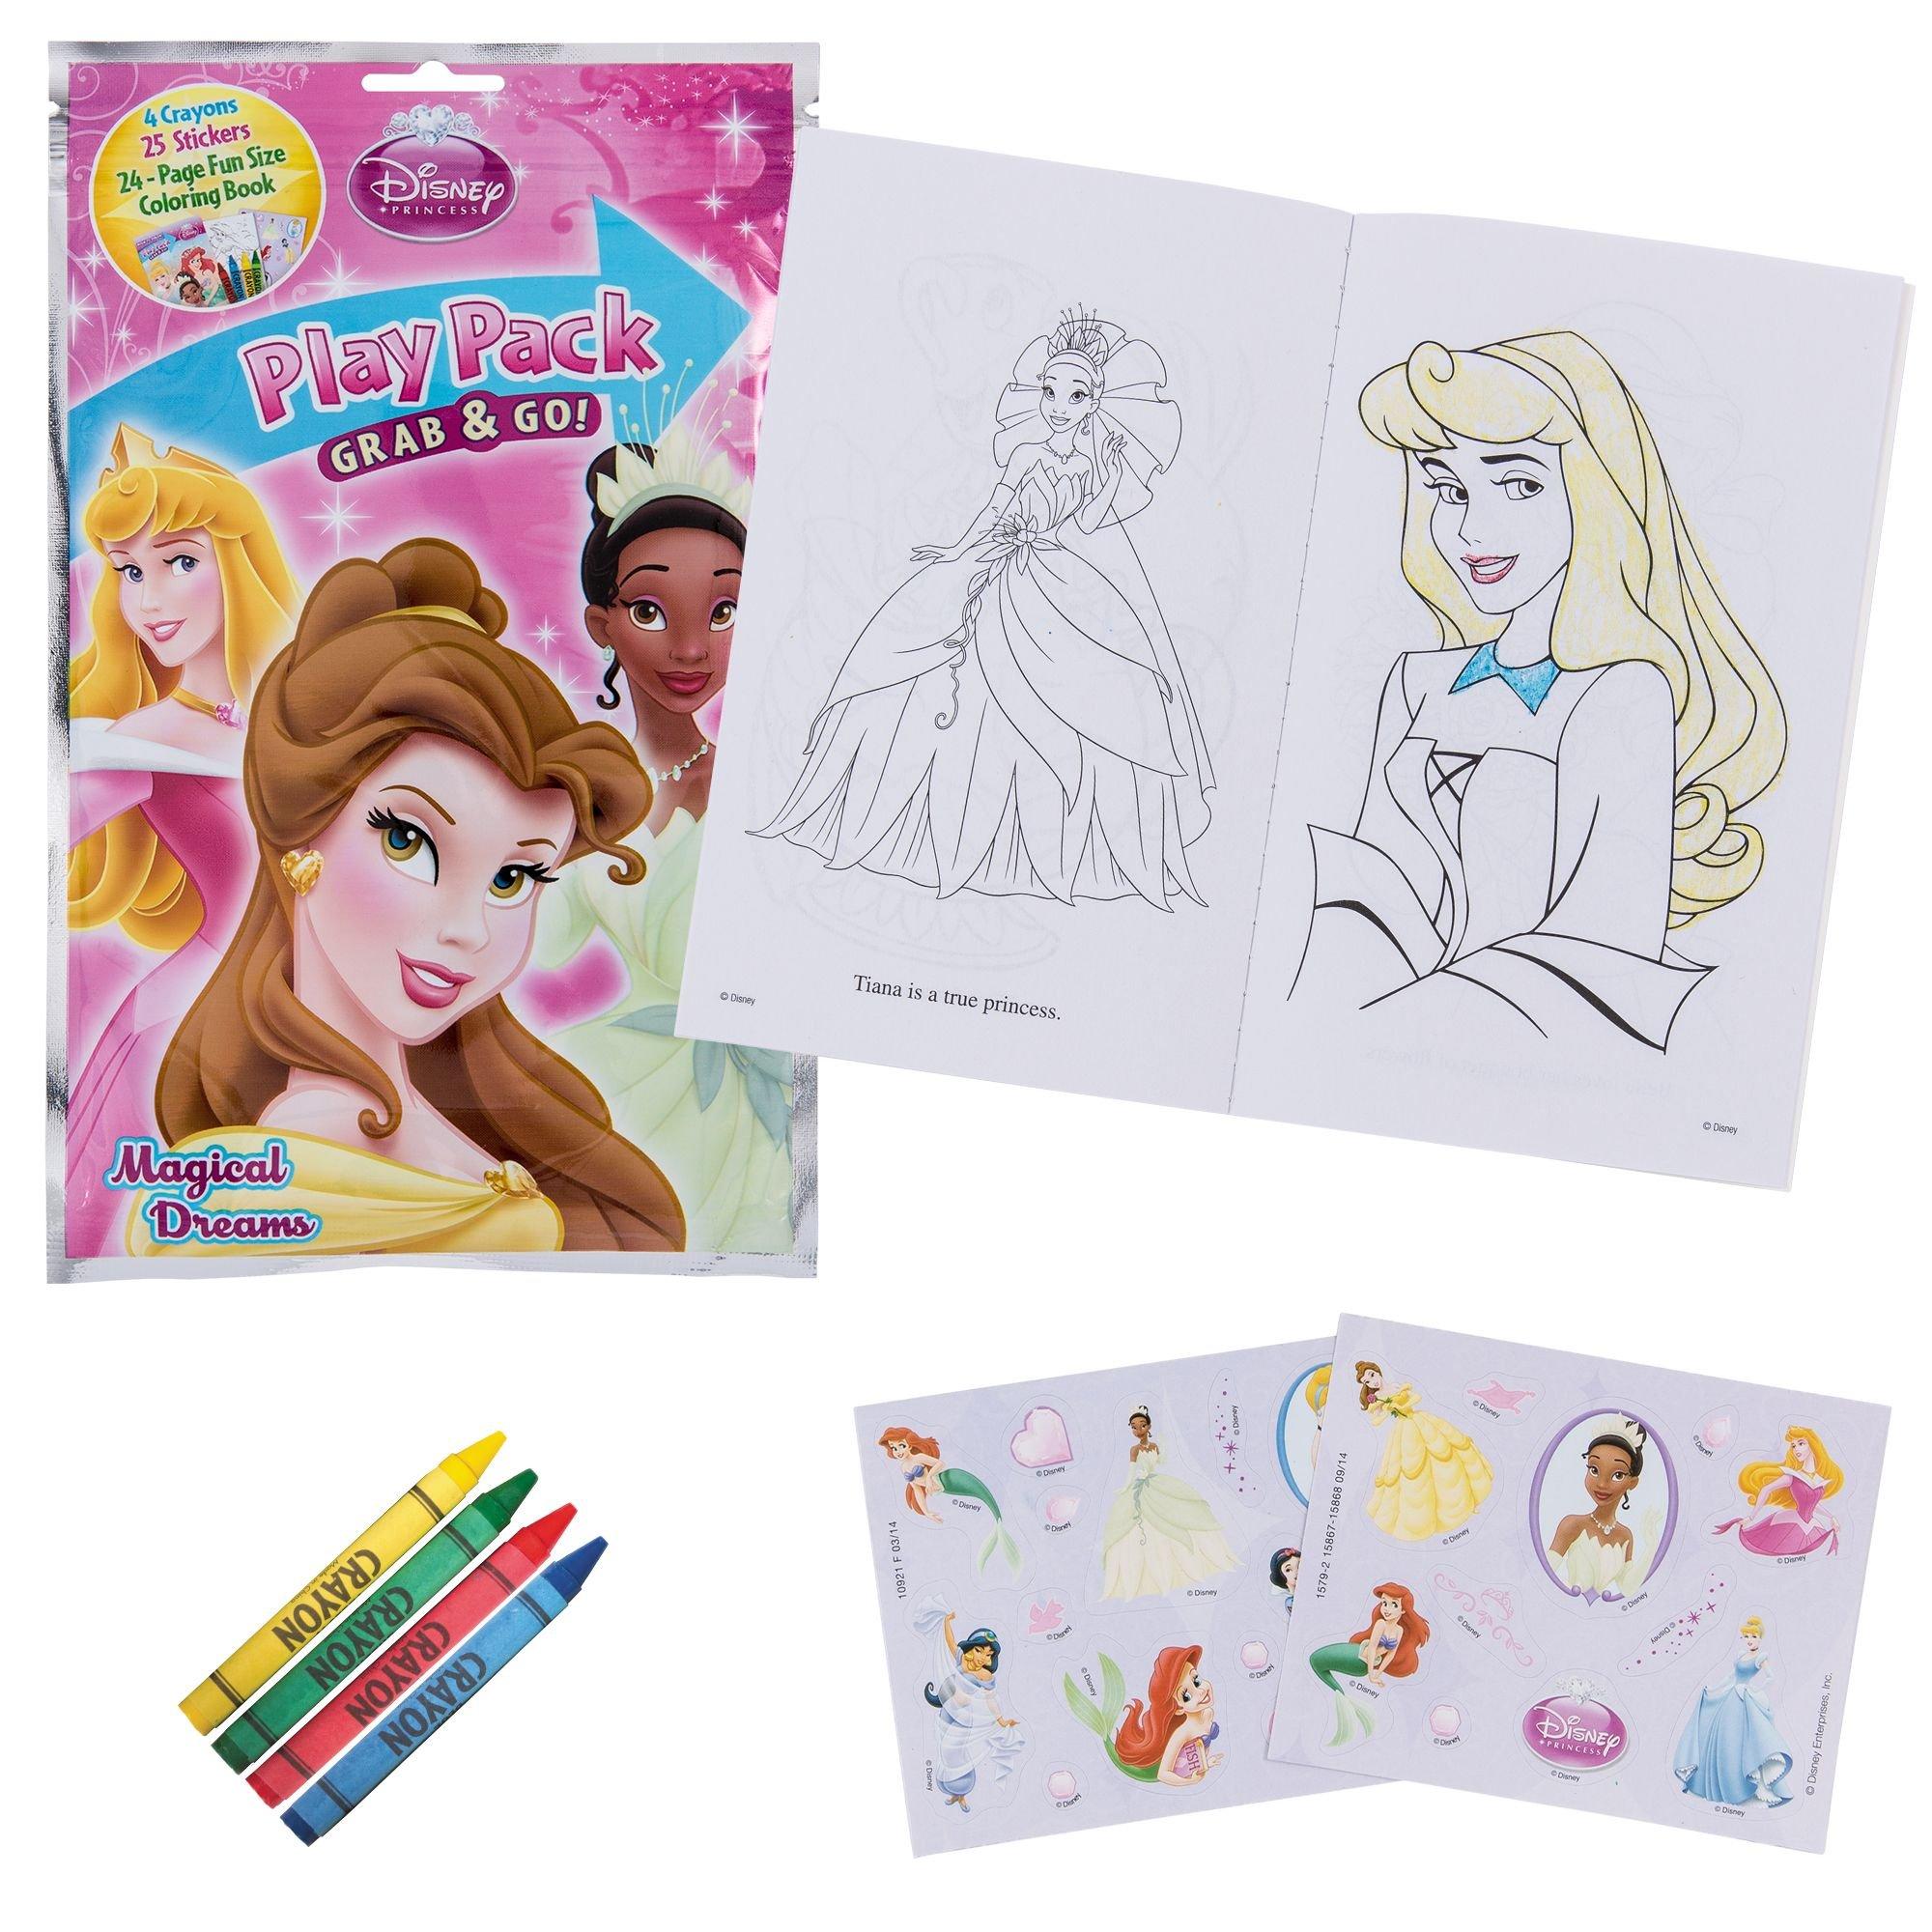  Disney Princess Grab n Go Play Pack Bulk - Bundle of 24 Play  Packs with Stickers, Coloring Book, and Crayons - Ideal for ages 3 and up  (Disney Princess Toys Party